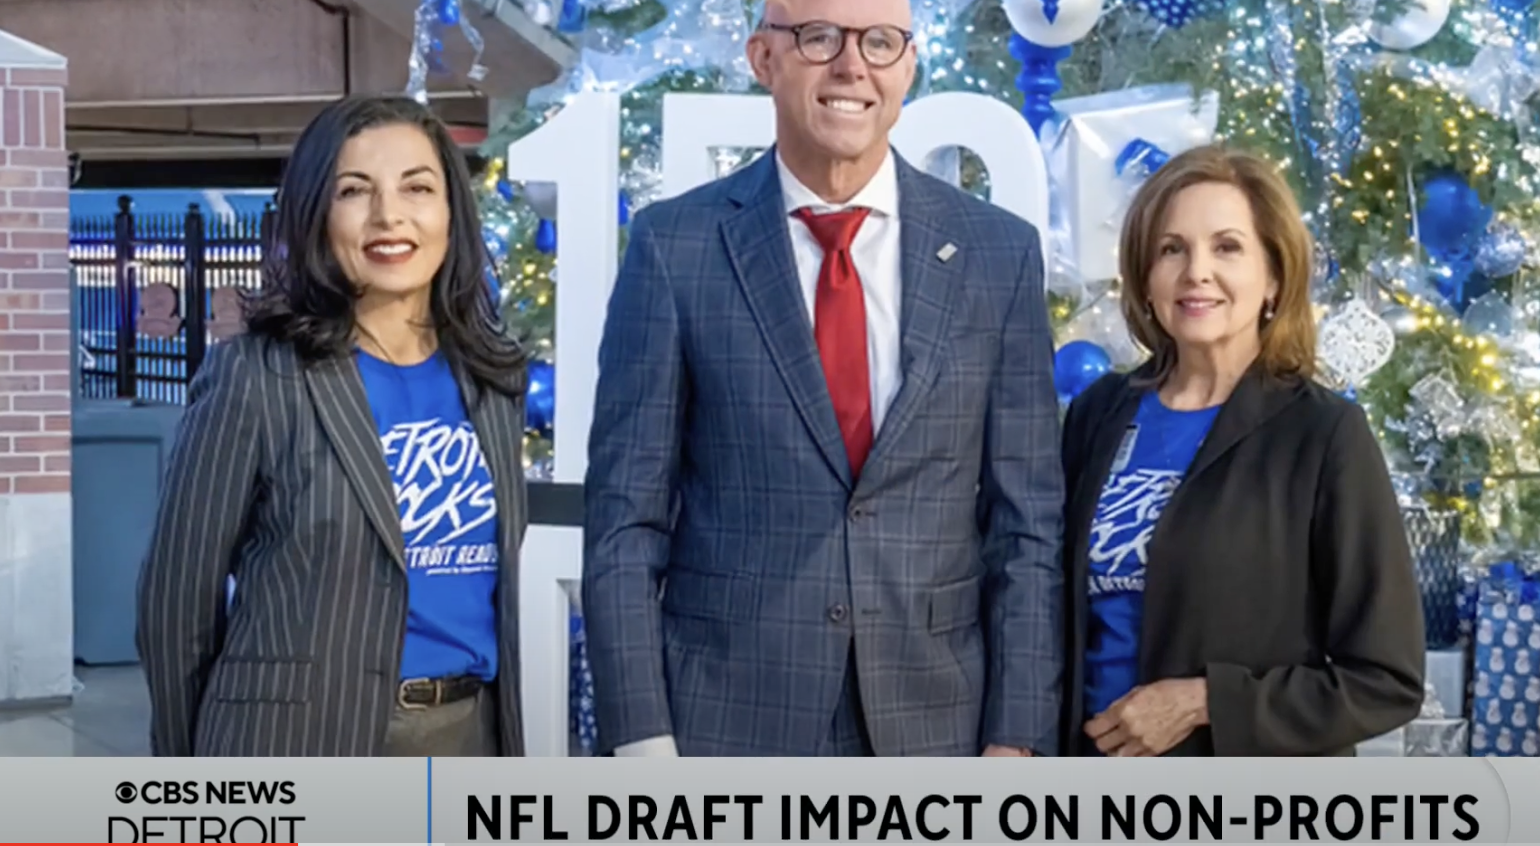 A look into the impact of the NFL draft on nonprofits in Metro Detroit